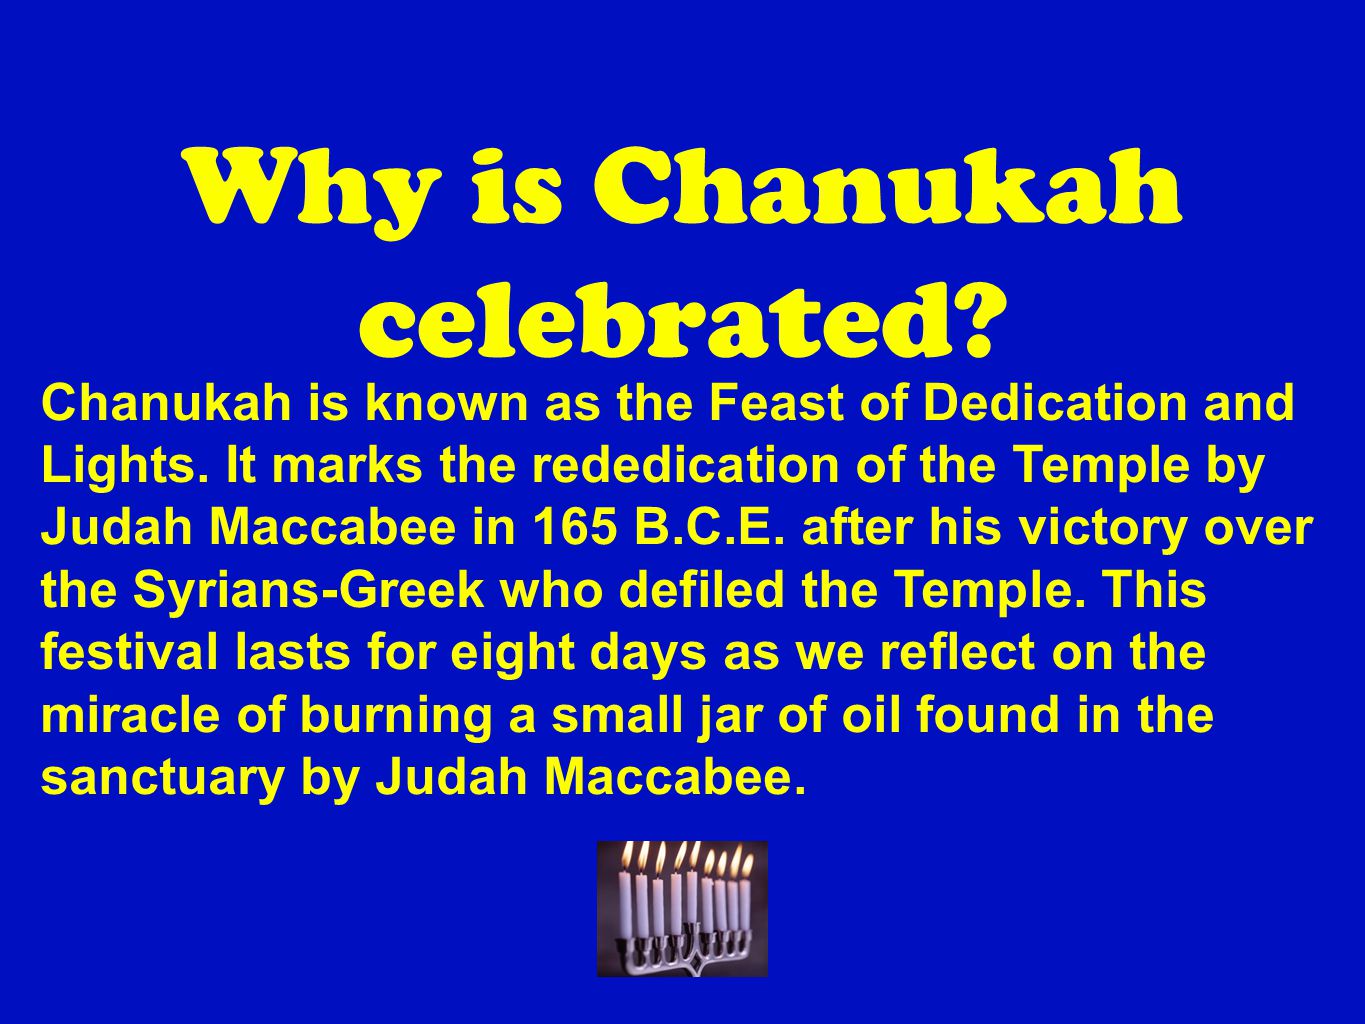 Why is Chanukah celebrated